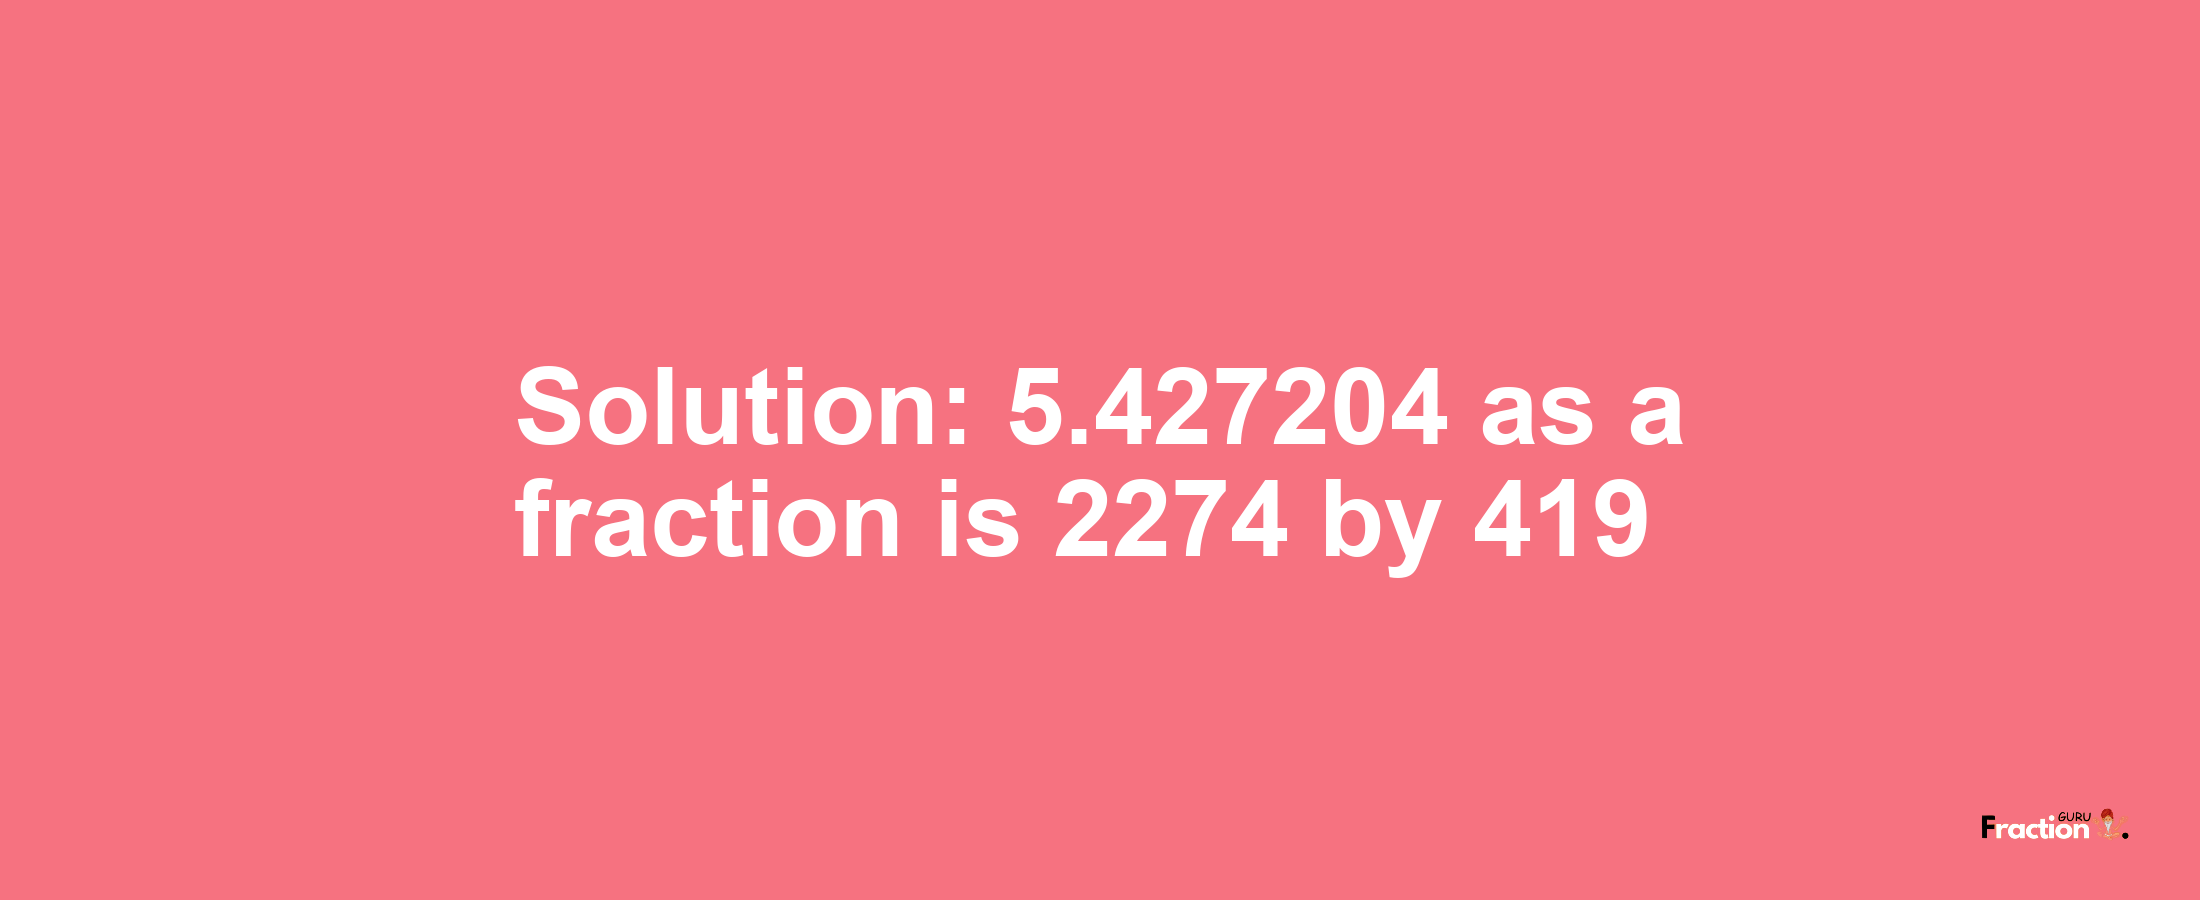 Solution:5.427204 as a fraction is 2274/419